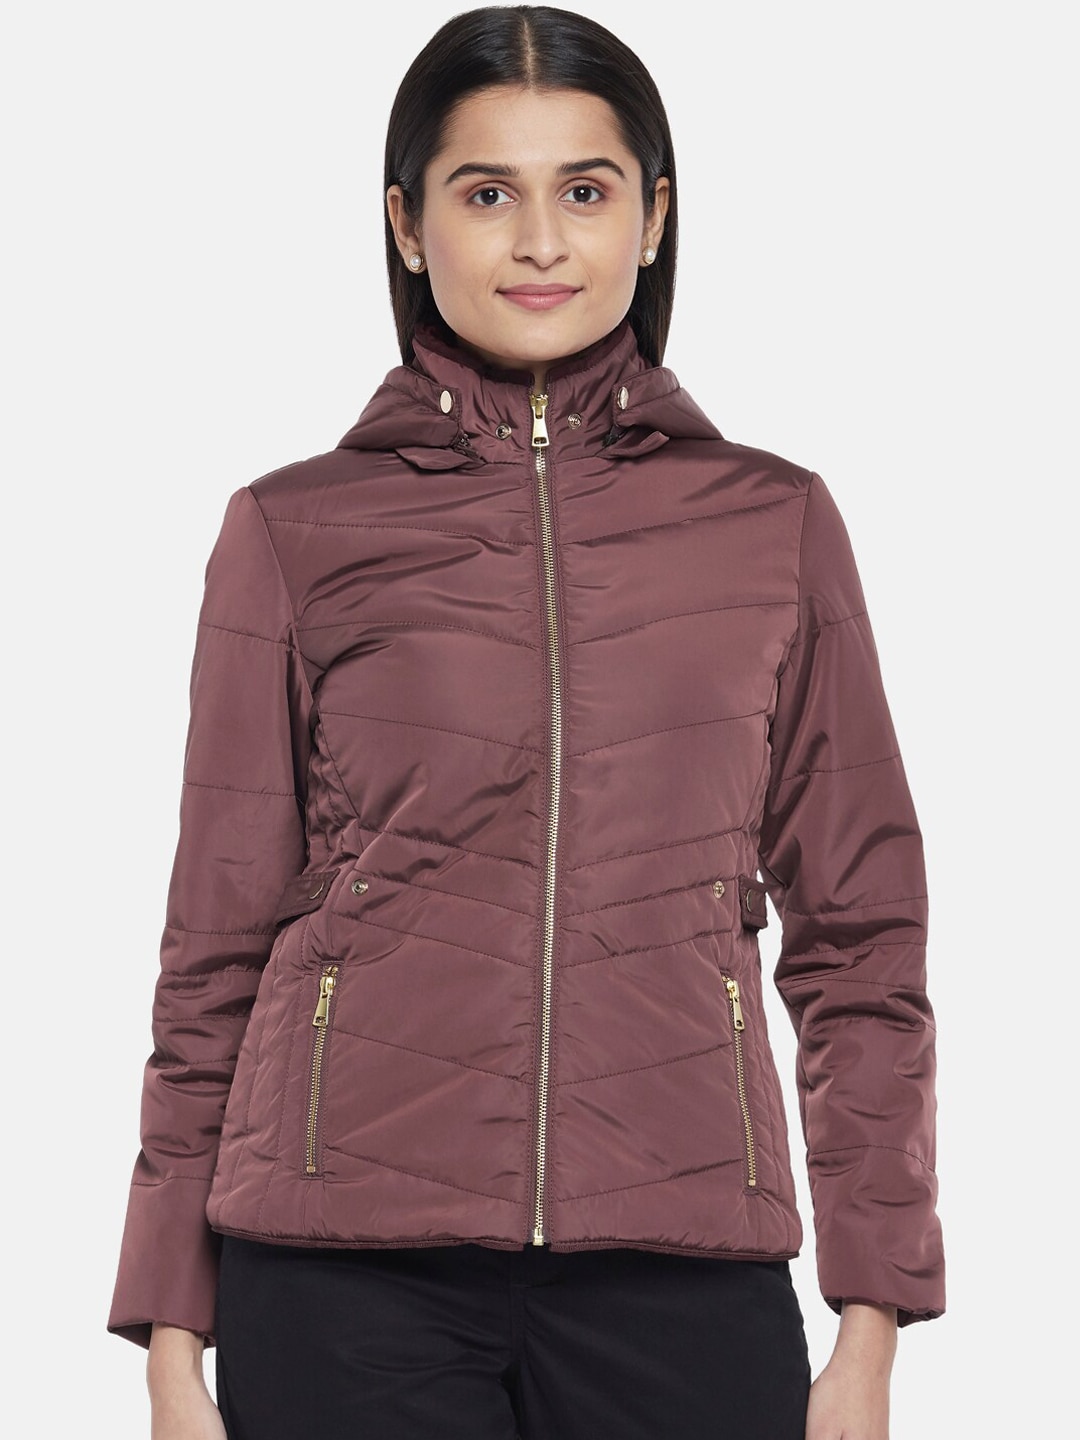 Honey by Pantaloons Women Red Padded Jacket Price in India